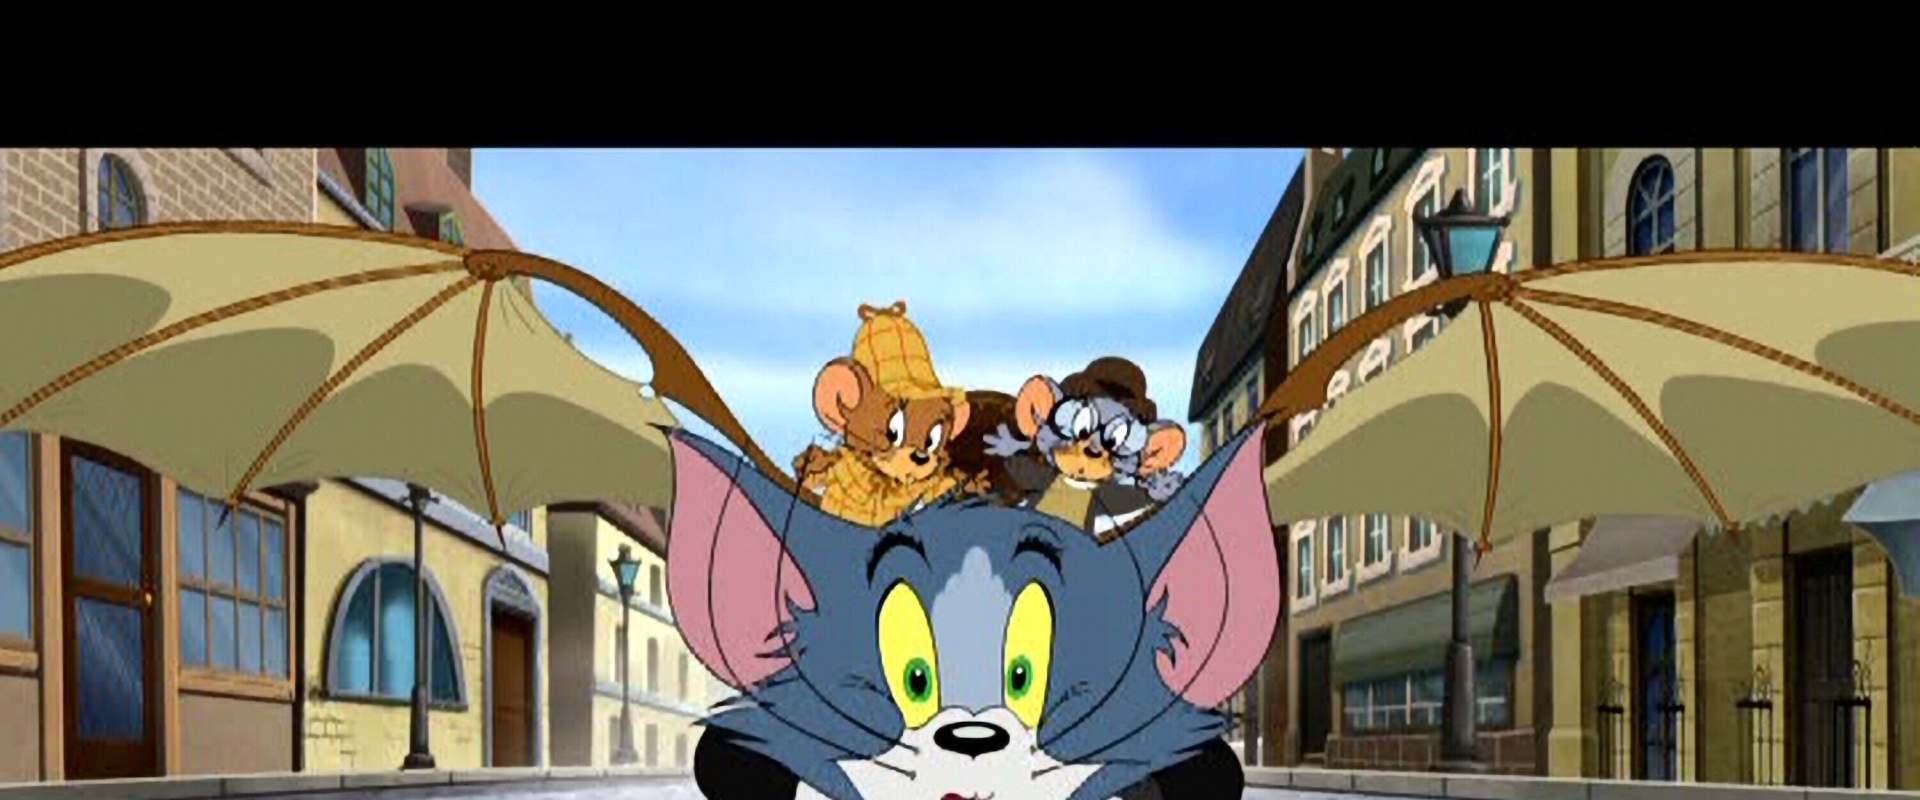 Tom and Jerry Meet Sherlock Holmes background 2